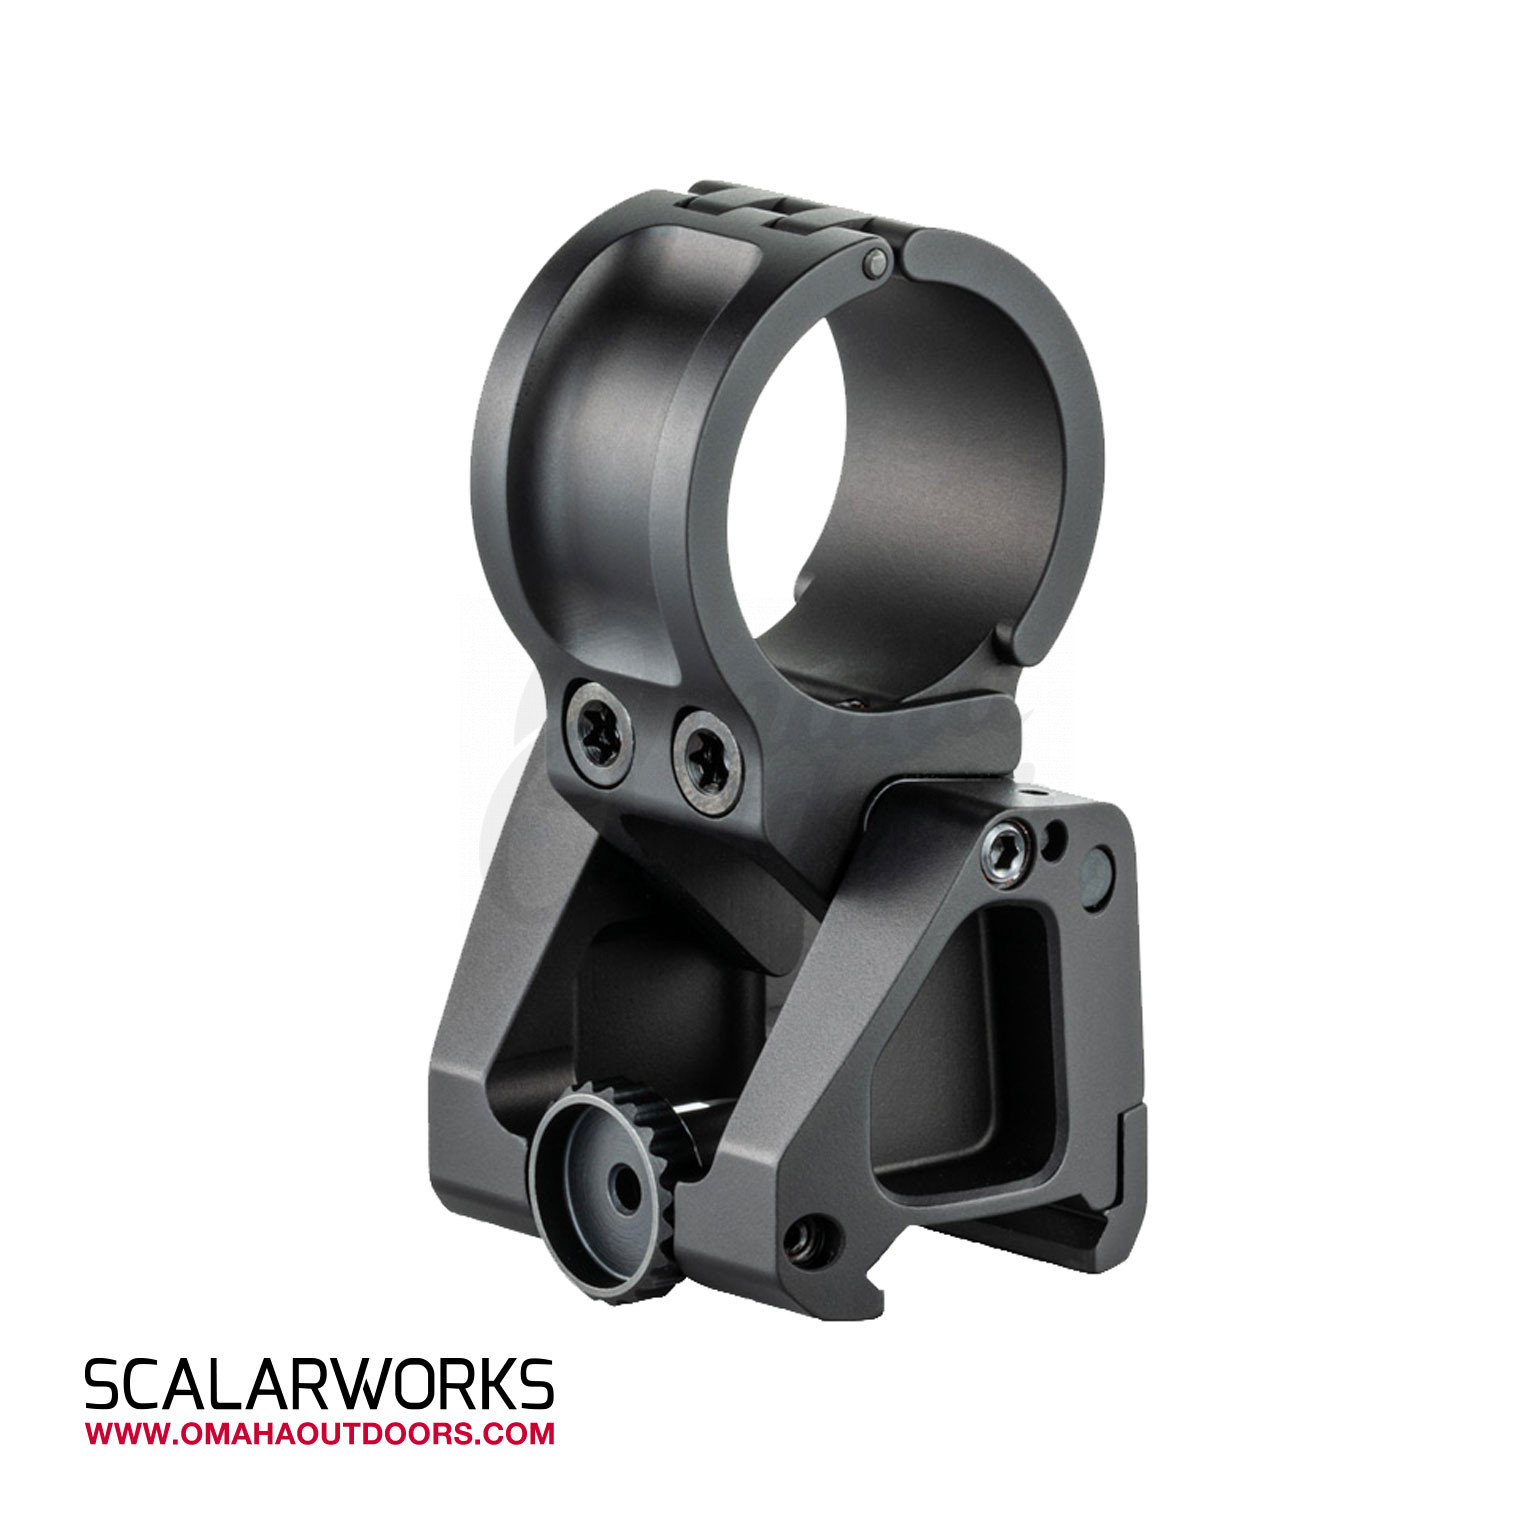 856481007164 SCALARWORKS LEAP 06 Aimpoint Magnifier Mount 1.93 ...